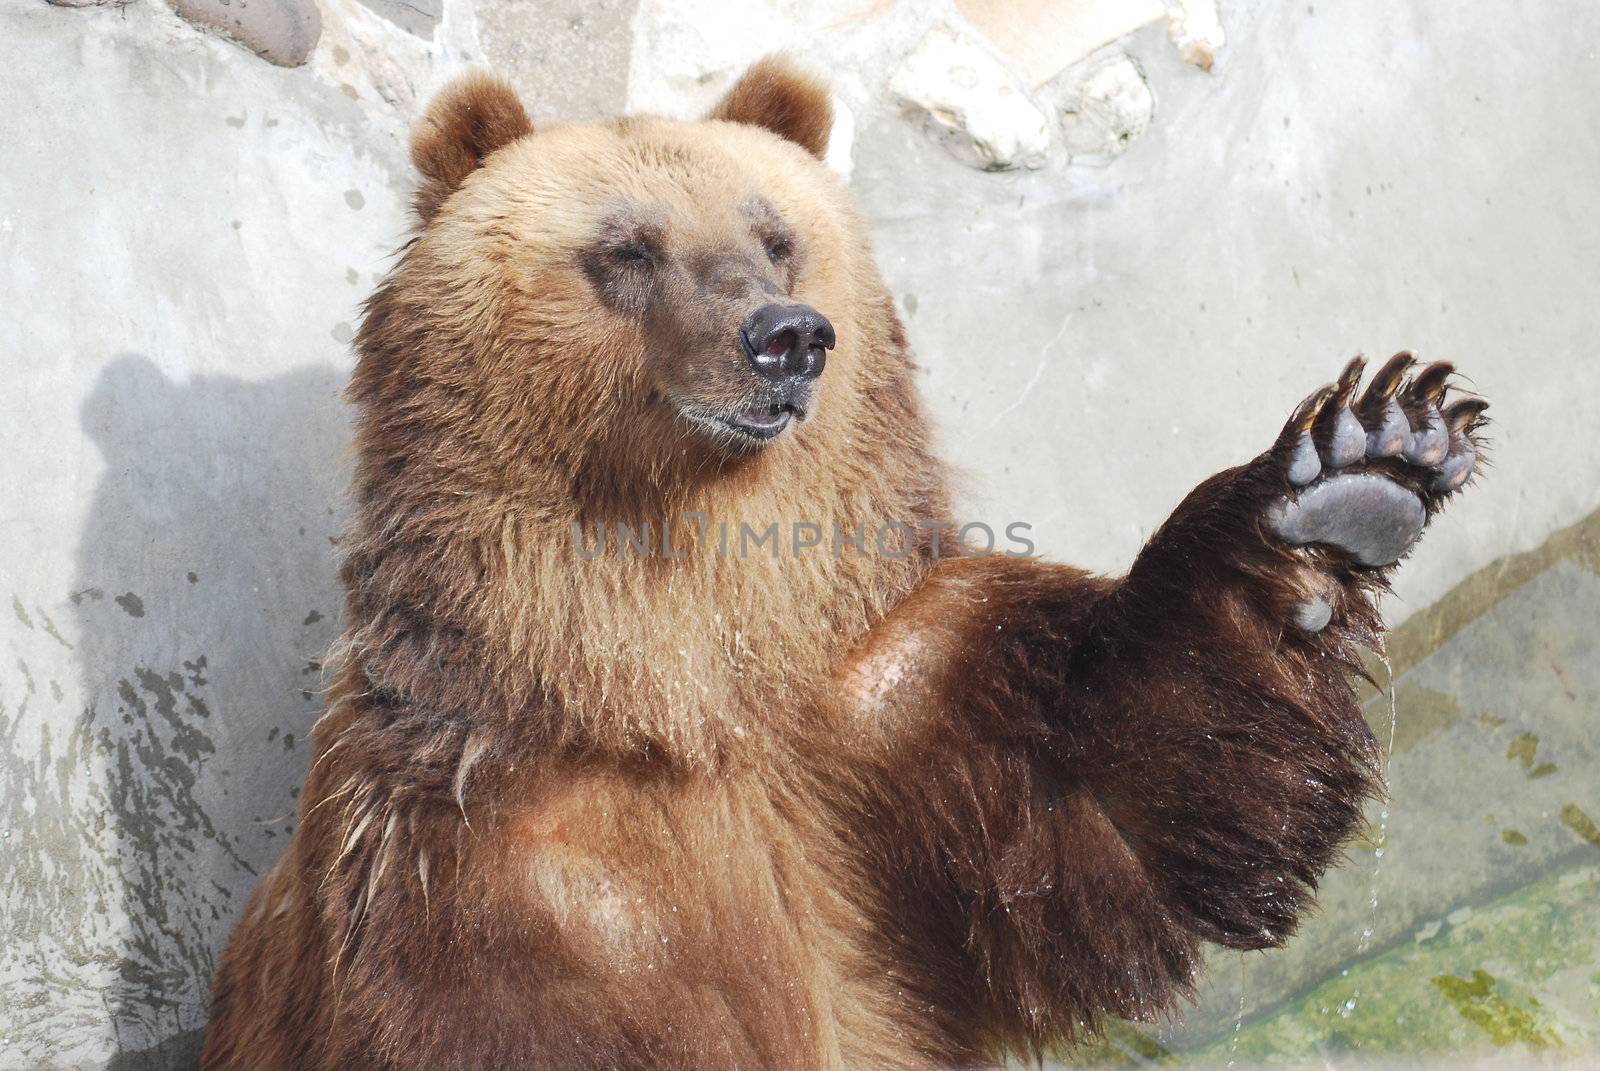 The brown bear welcomes with a paw by svtrotof